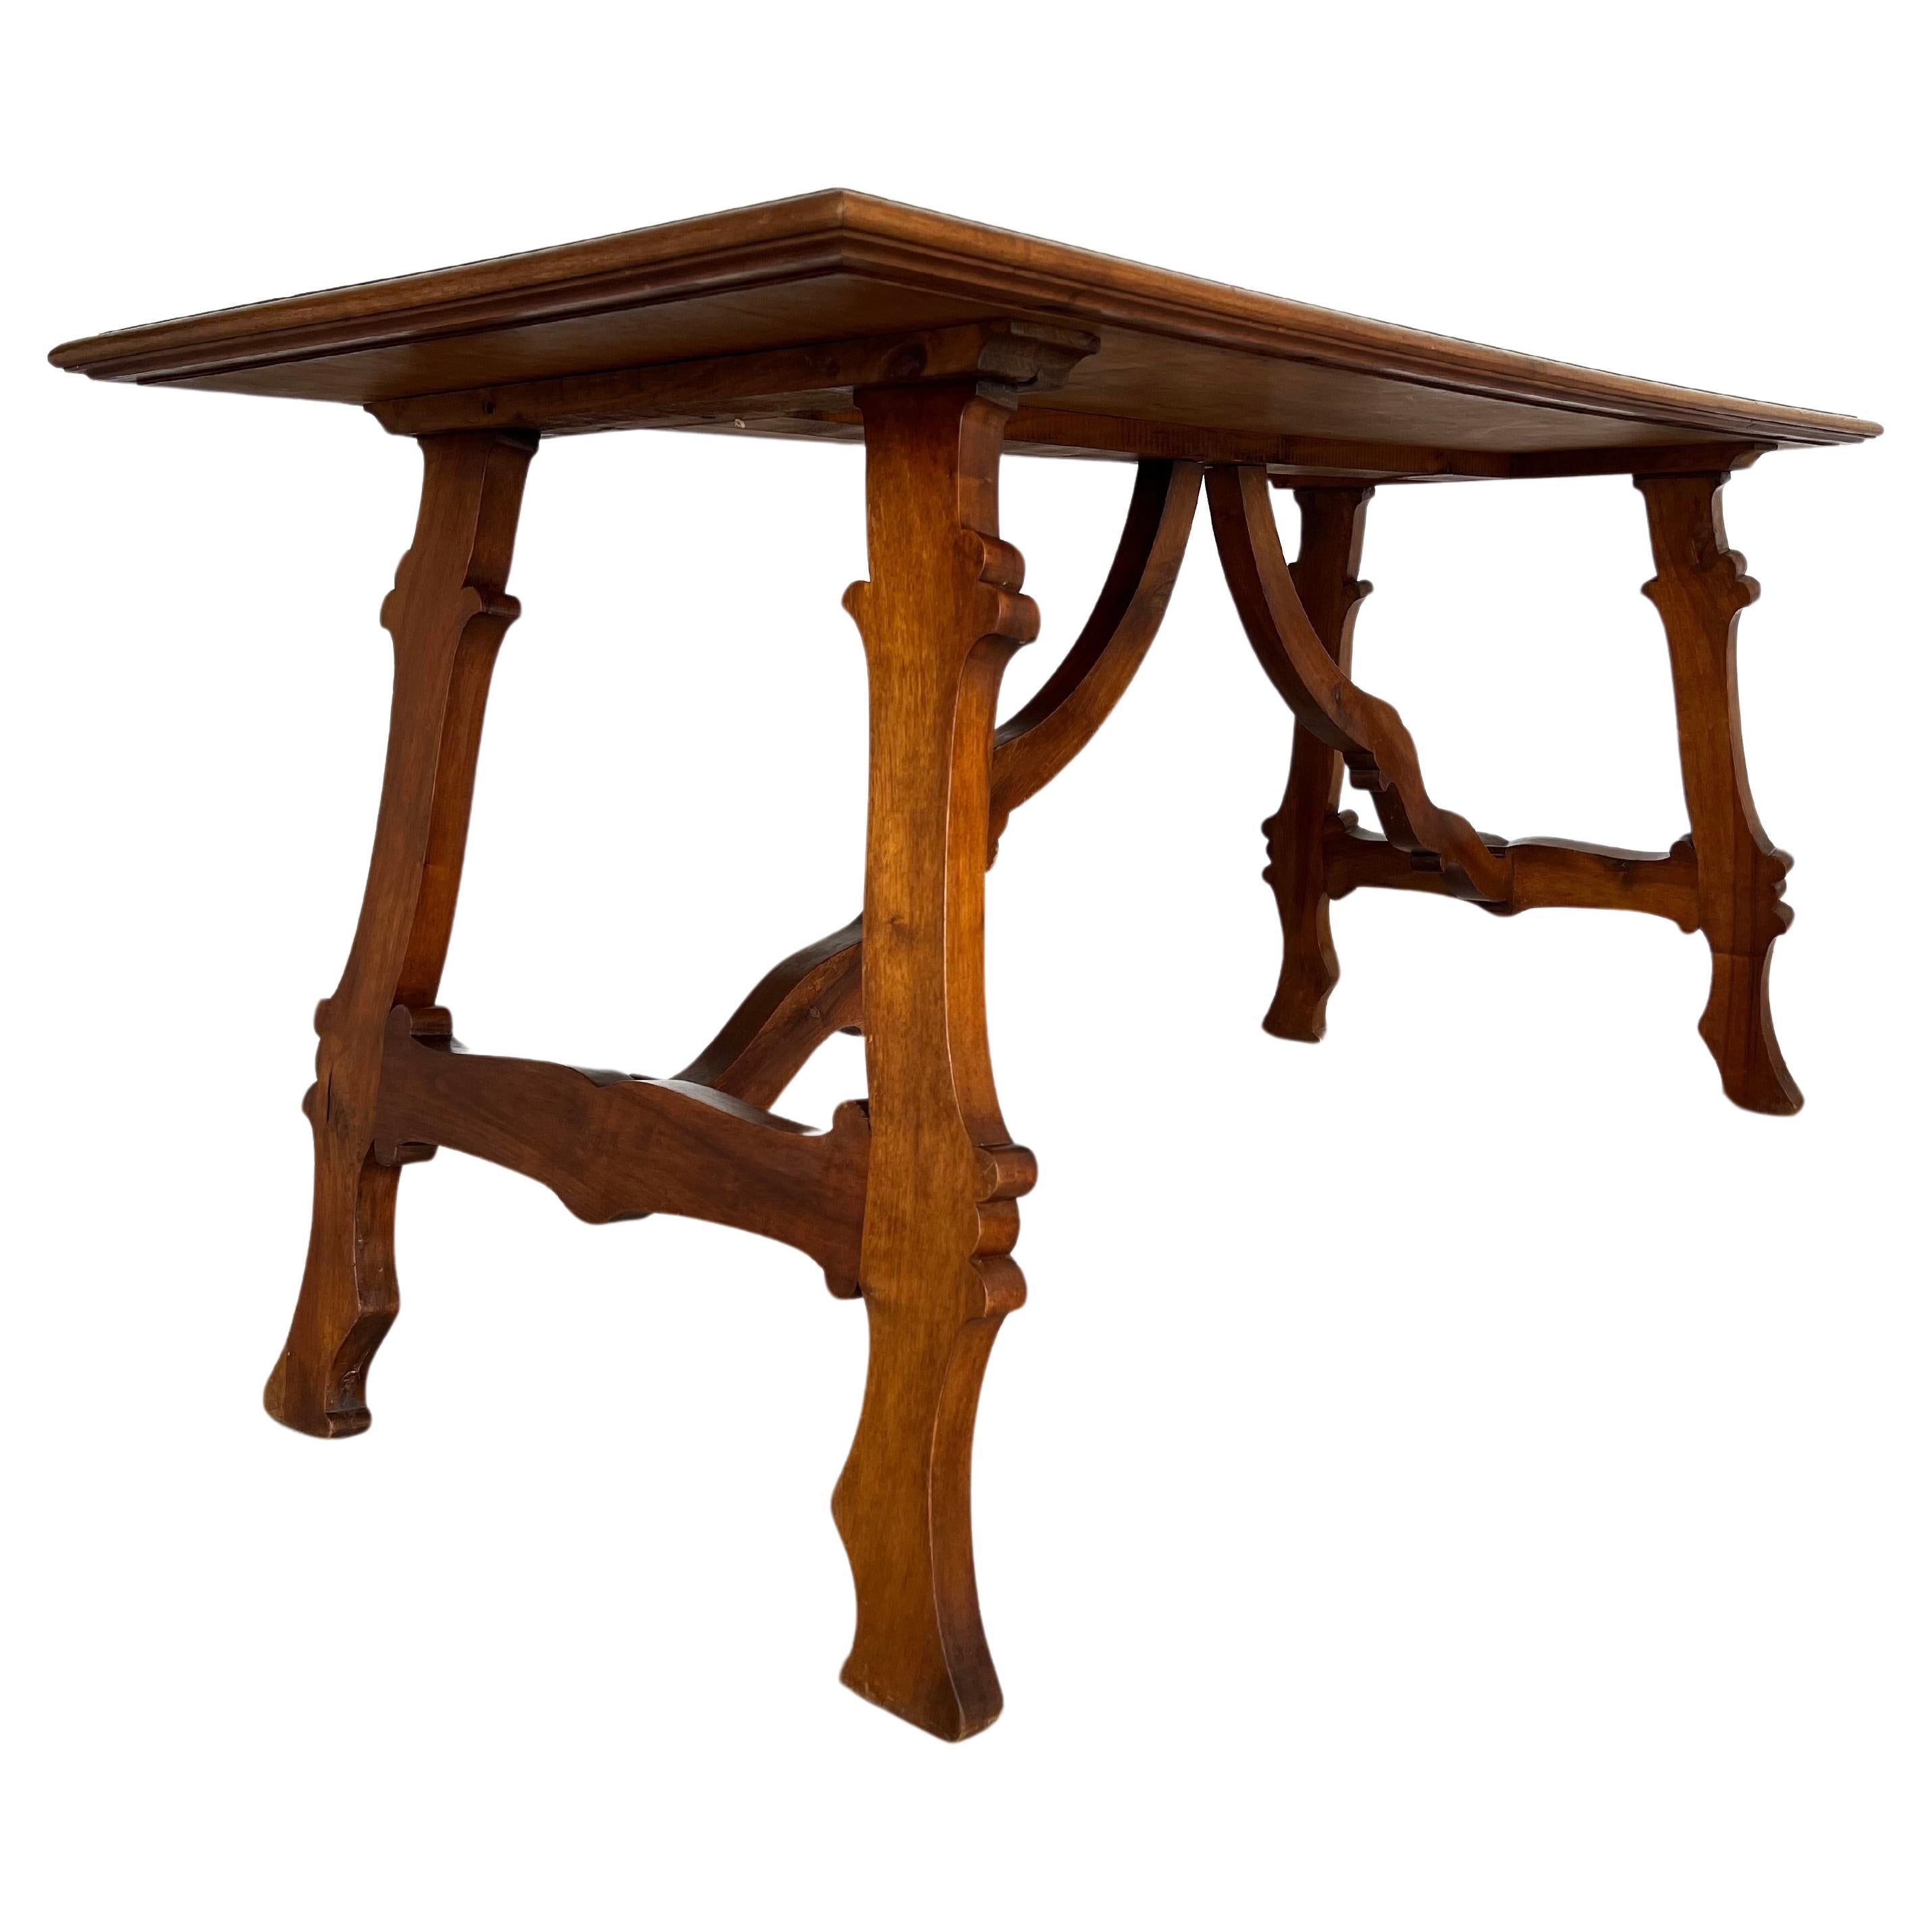 Italian Tuscan Renaissance Refectory Hand Crafted Walnut Dining Table For Sale